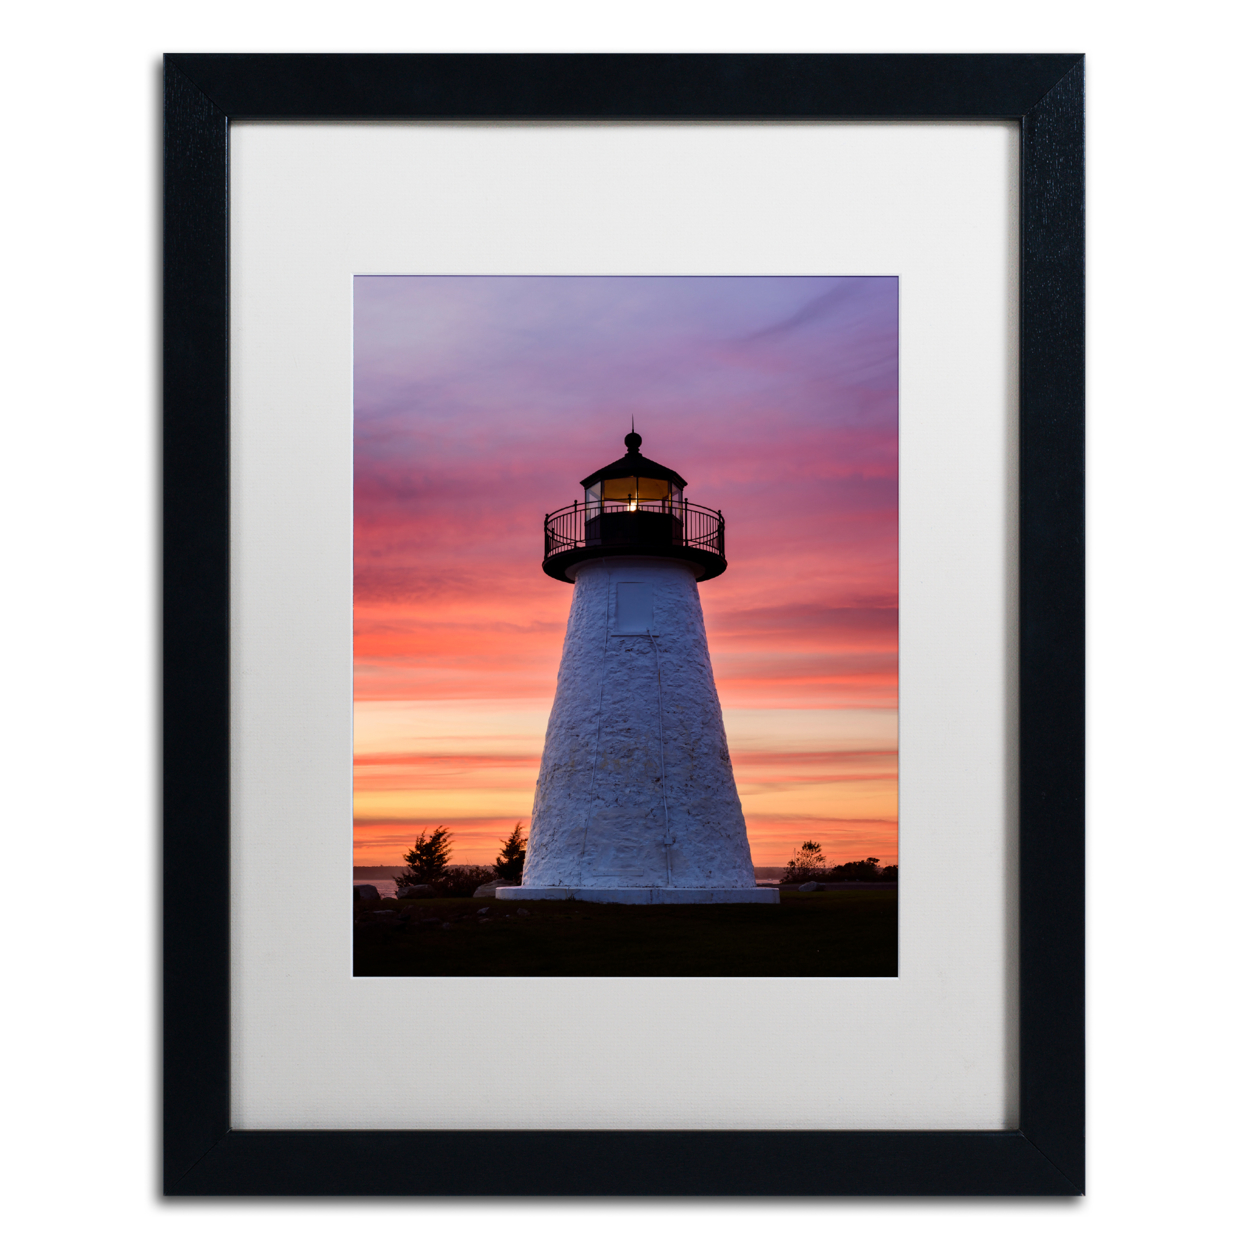 Michael Blanchette Photography 'Needle In The Sky' Black Wooden Framed Art 18 X 22 Inches